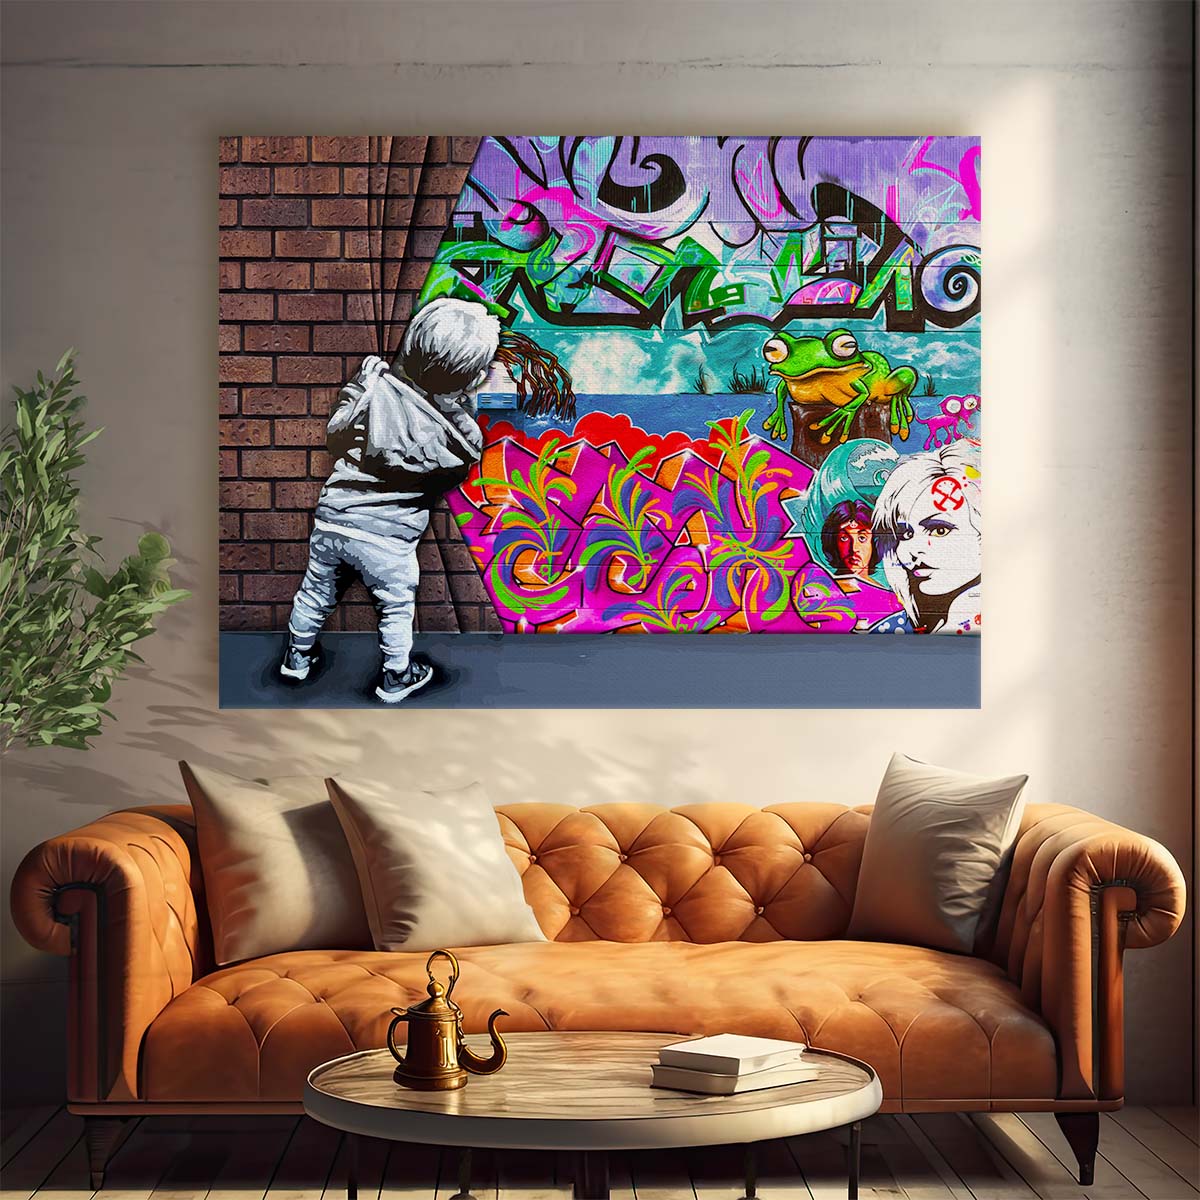 Banksy Behind The Curtain Graffiti Wall Art by Luxuriance Designs. Made in USA.